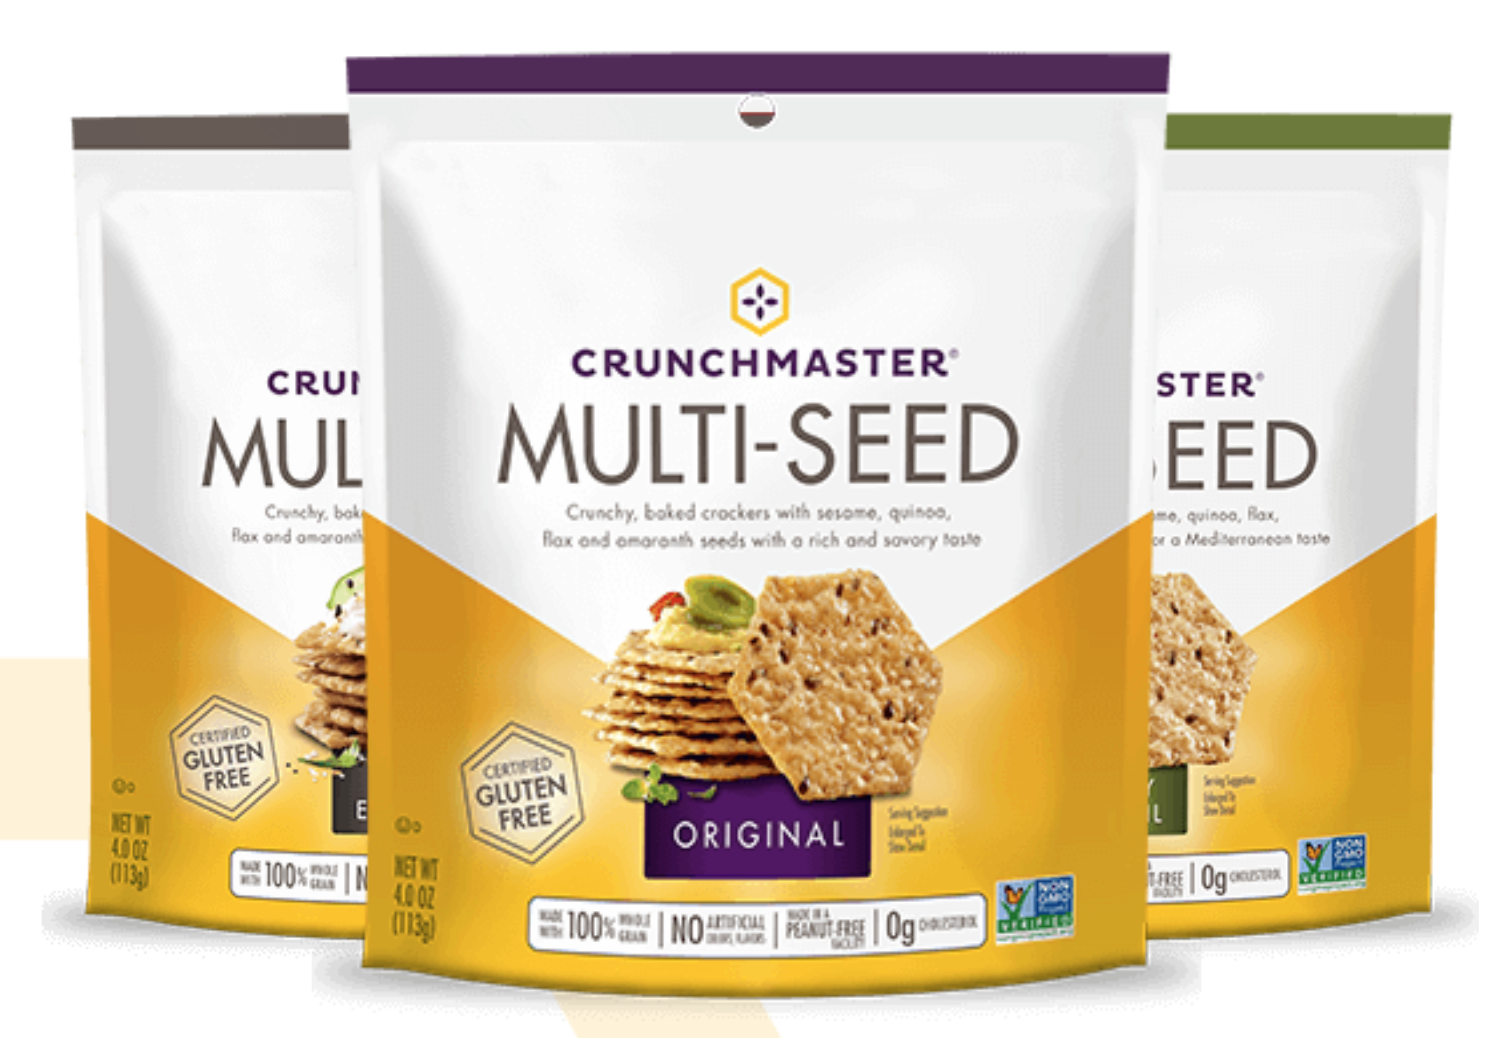 Crunchmaster Crackers FREE at Publix